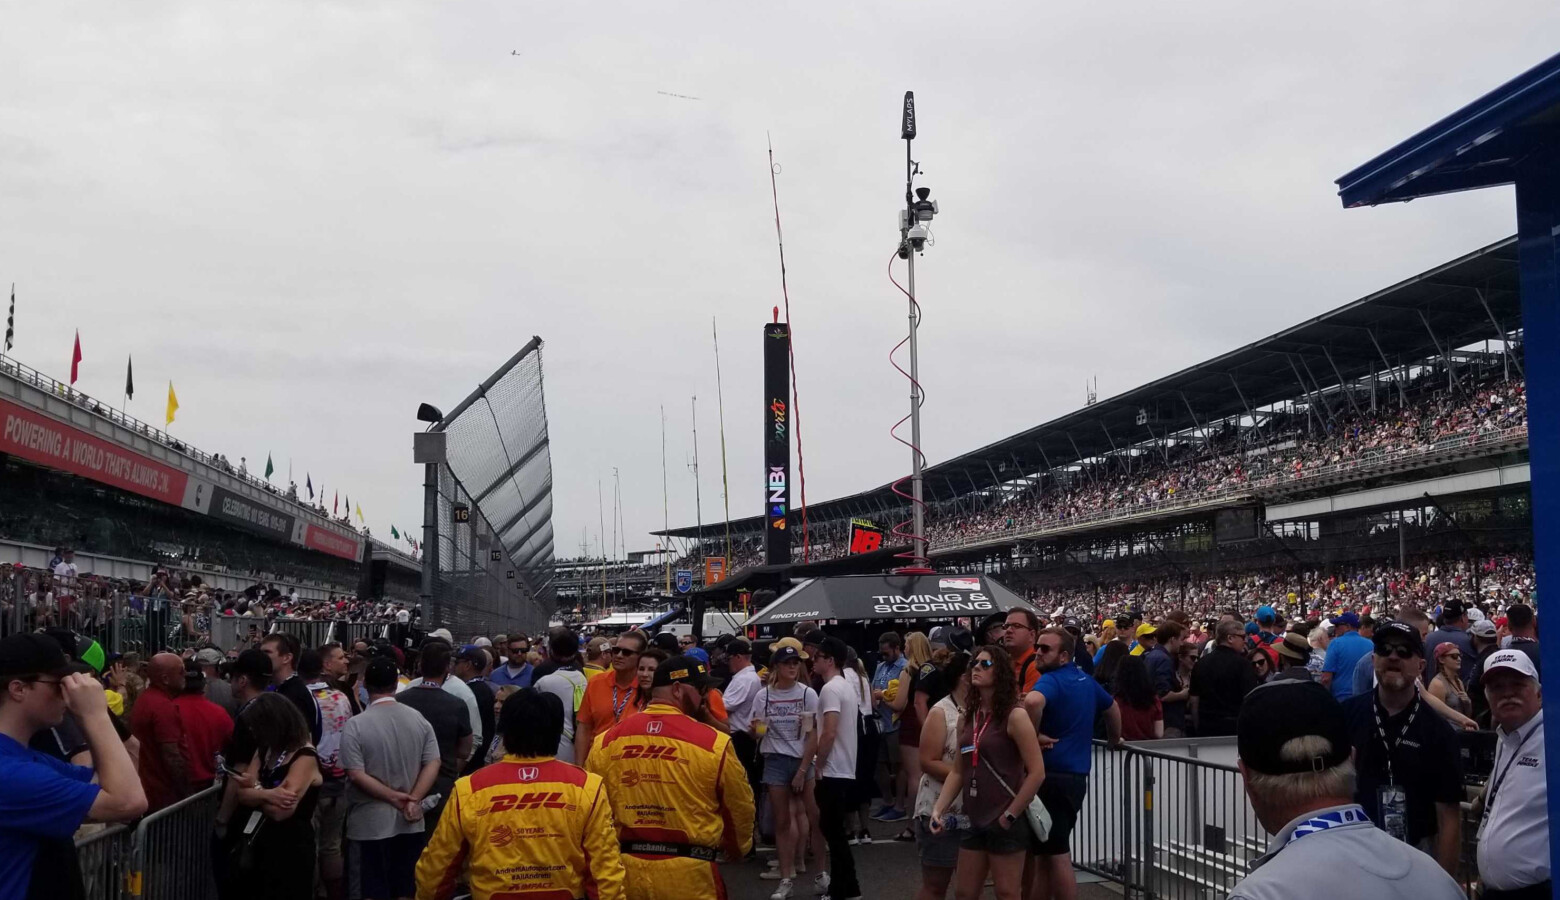 Spectators arrive before the start of the 2019 Indianapolis 500 at the Indianapolis Motor Speedway. (FILE PHOTO: Samantha Horton/IPB News)